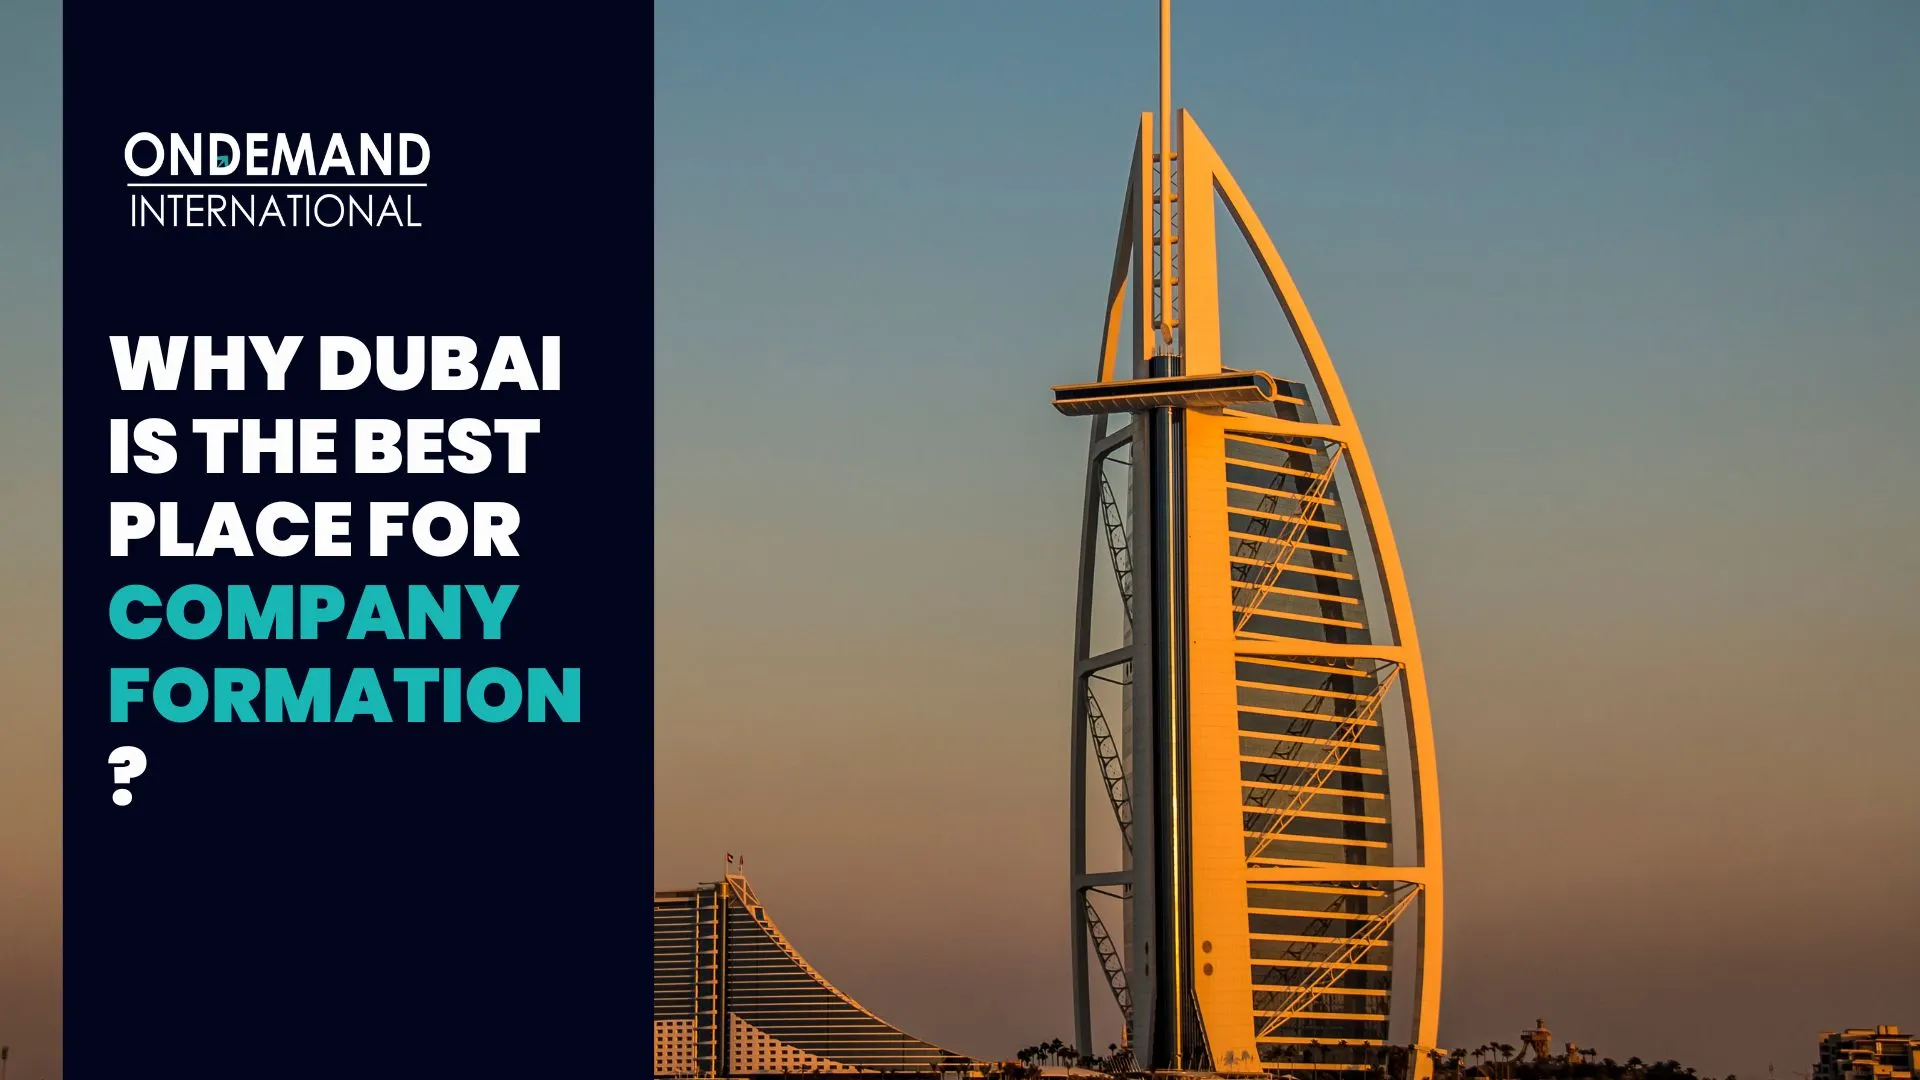 Why Dubai is the Best Place for Company Formation?